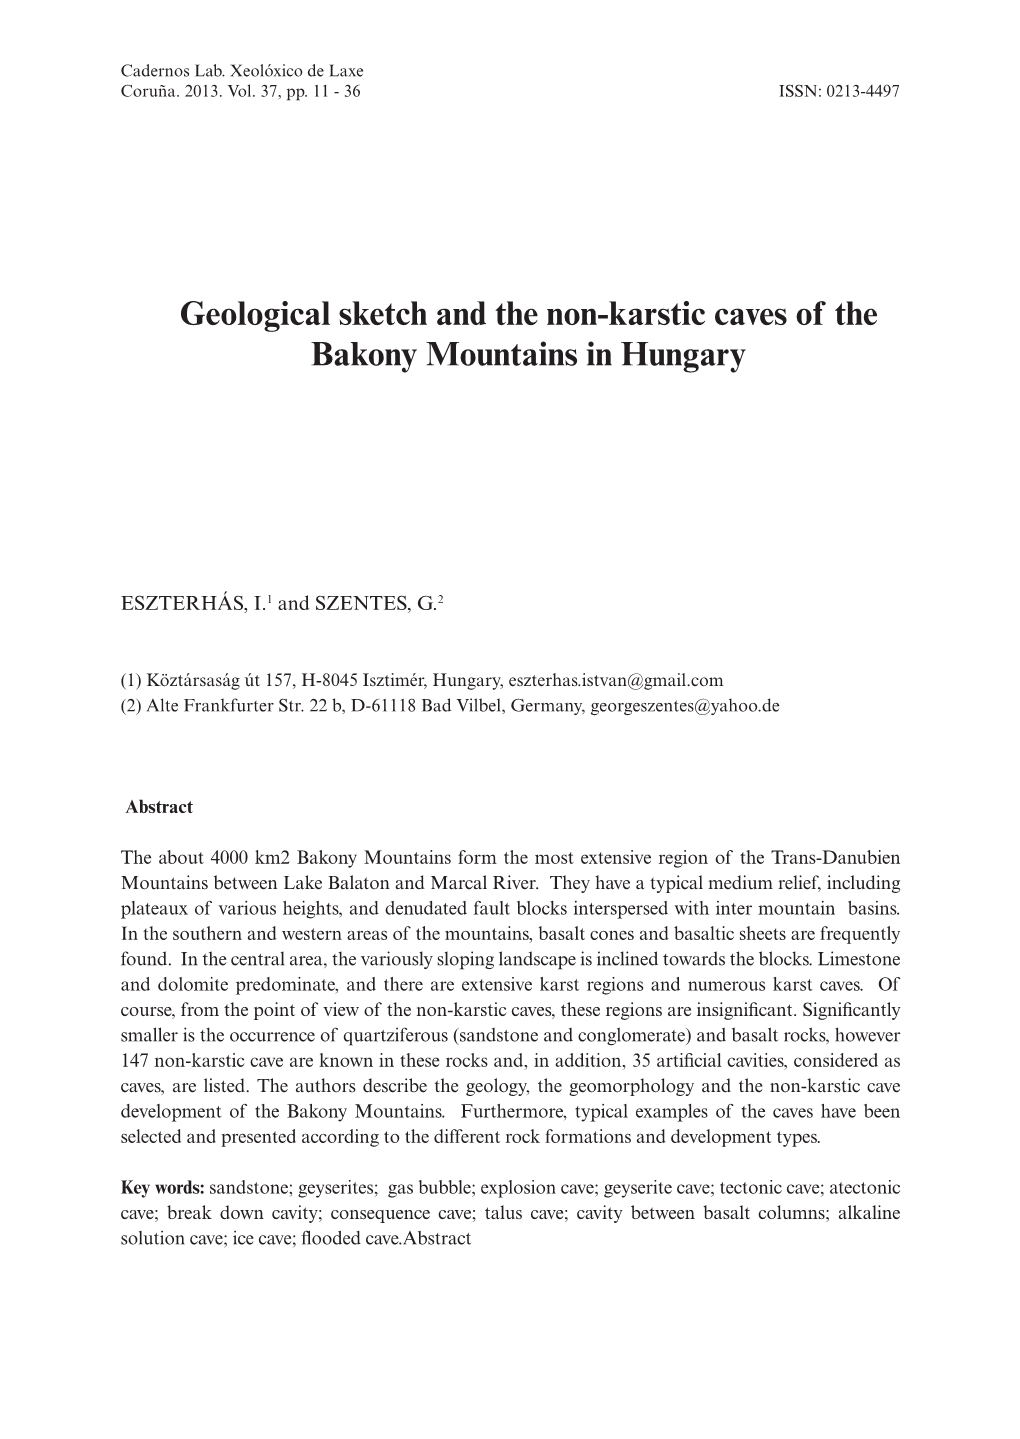 Geological Sketch and the Non-Karstic Caves of the Bakony Mountains in Hungary